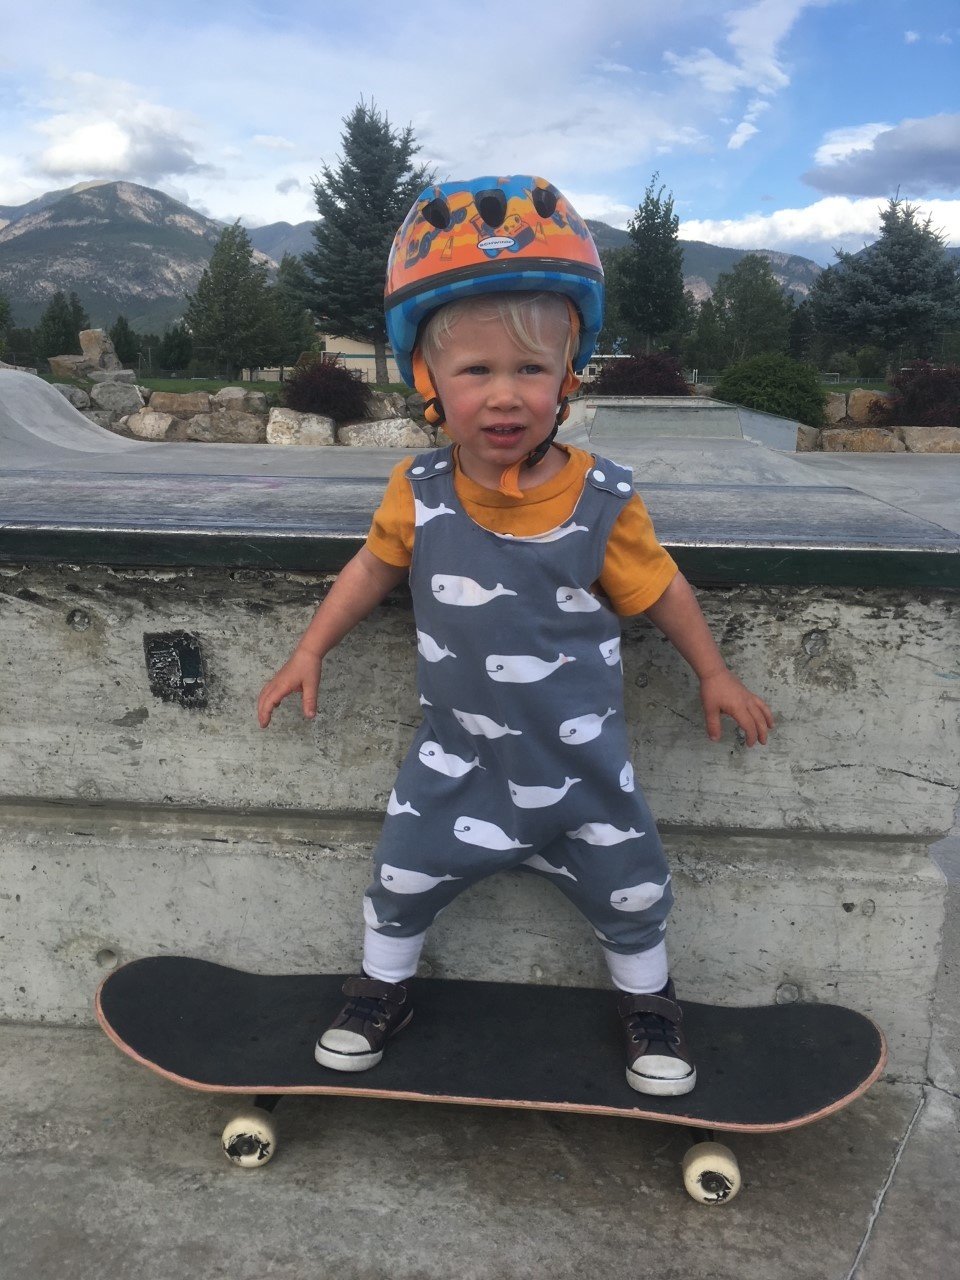 The best skateboards for kids - Syndicate Invermere